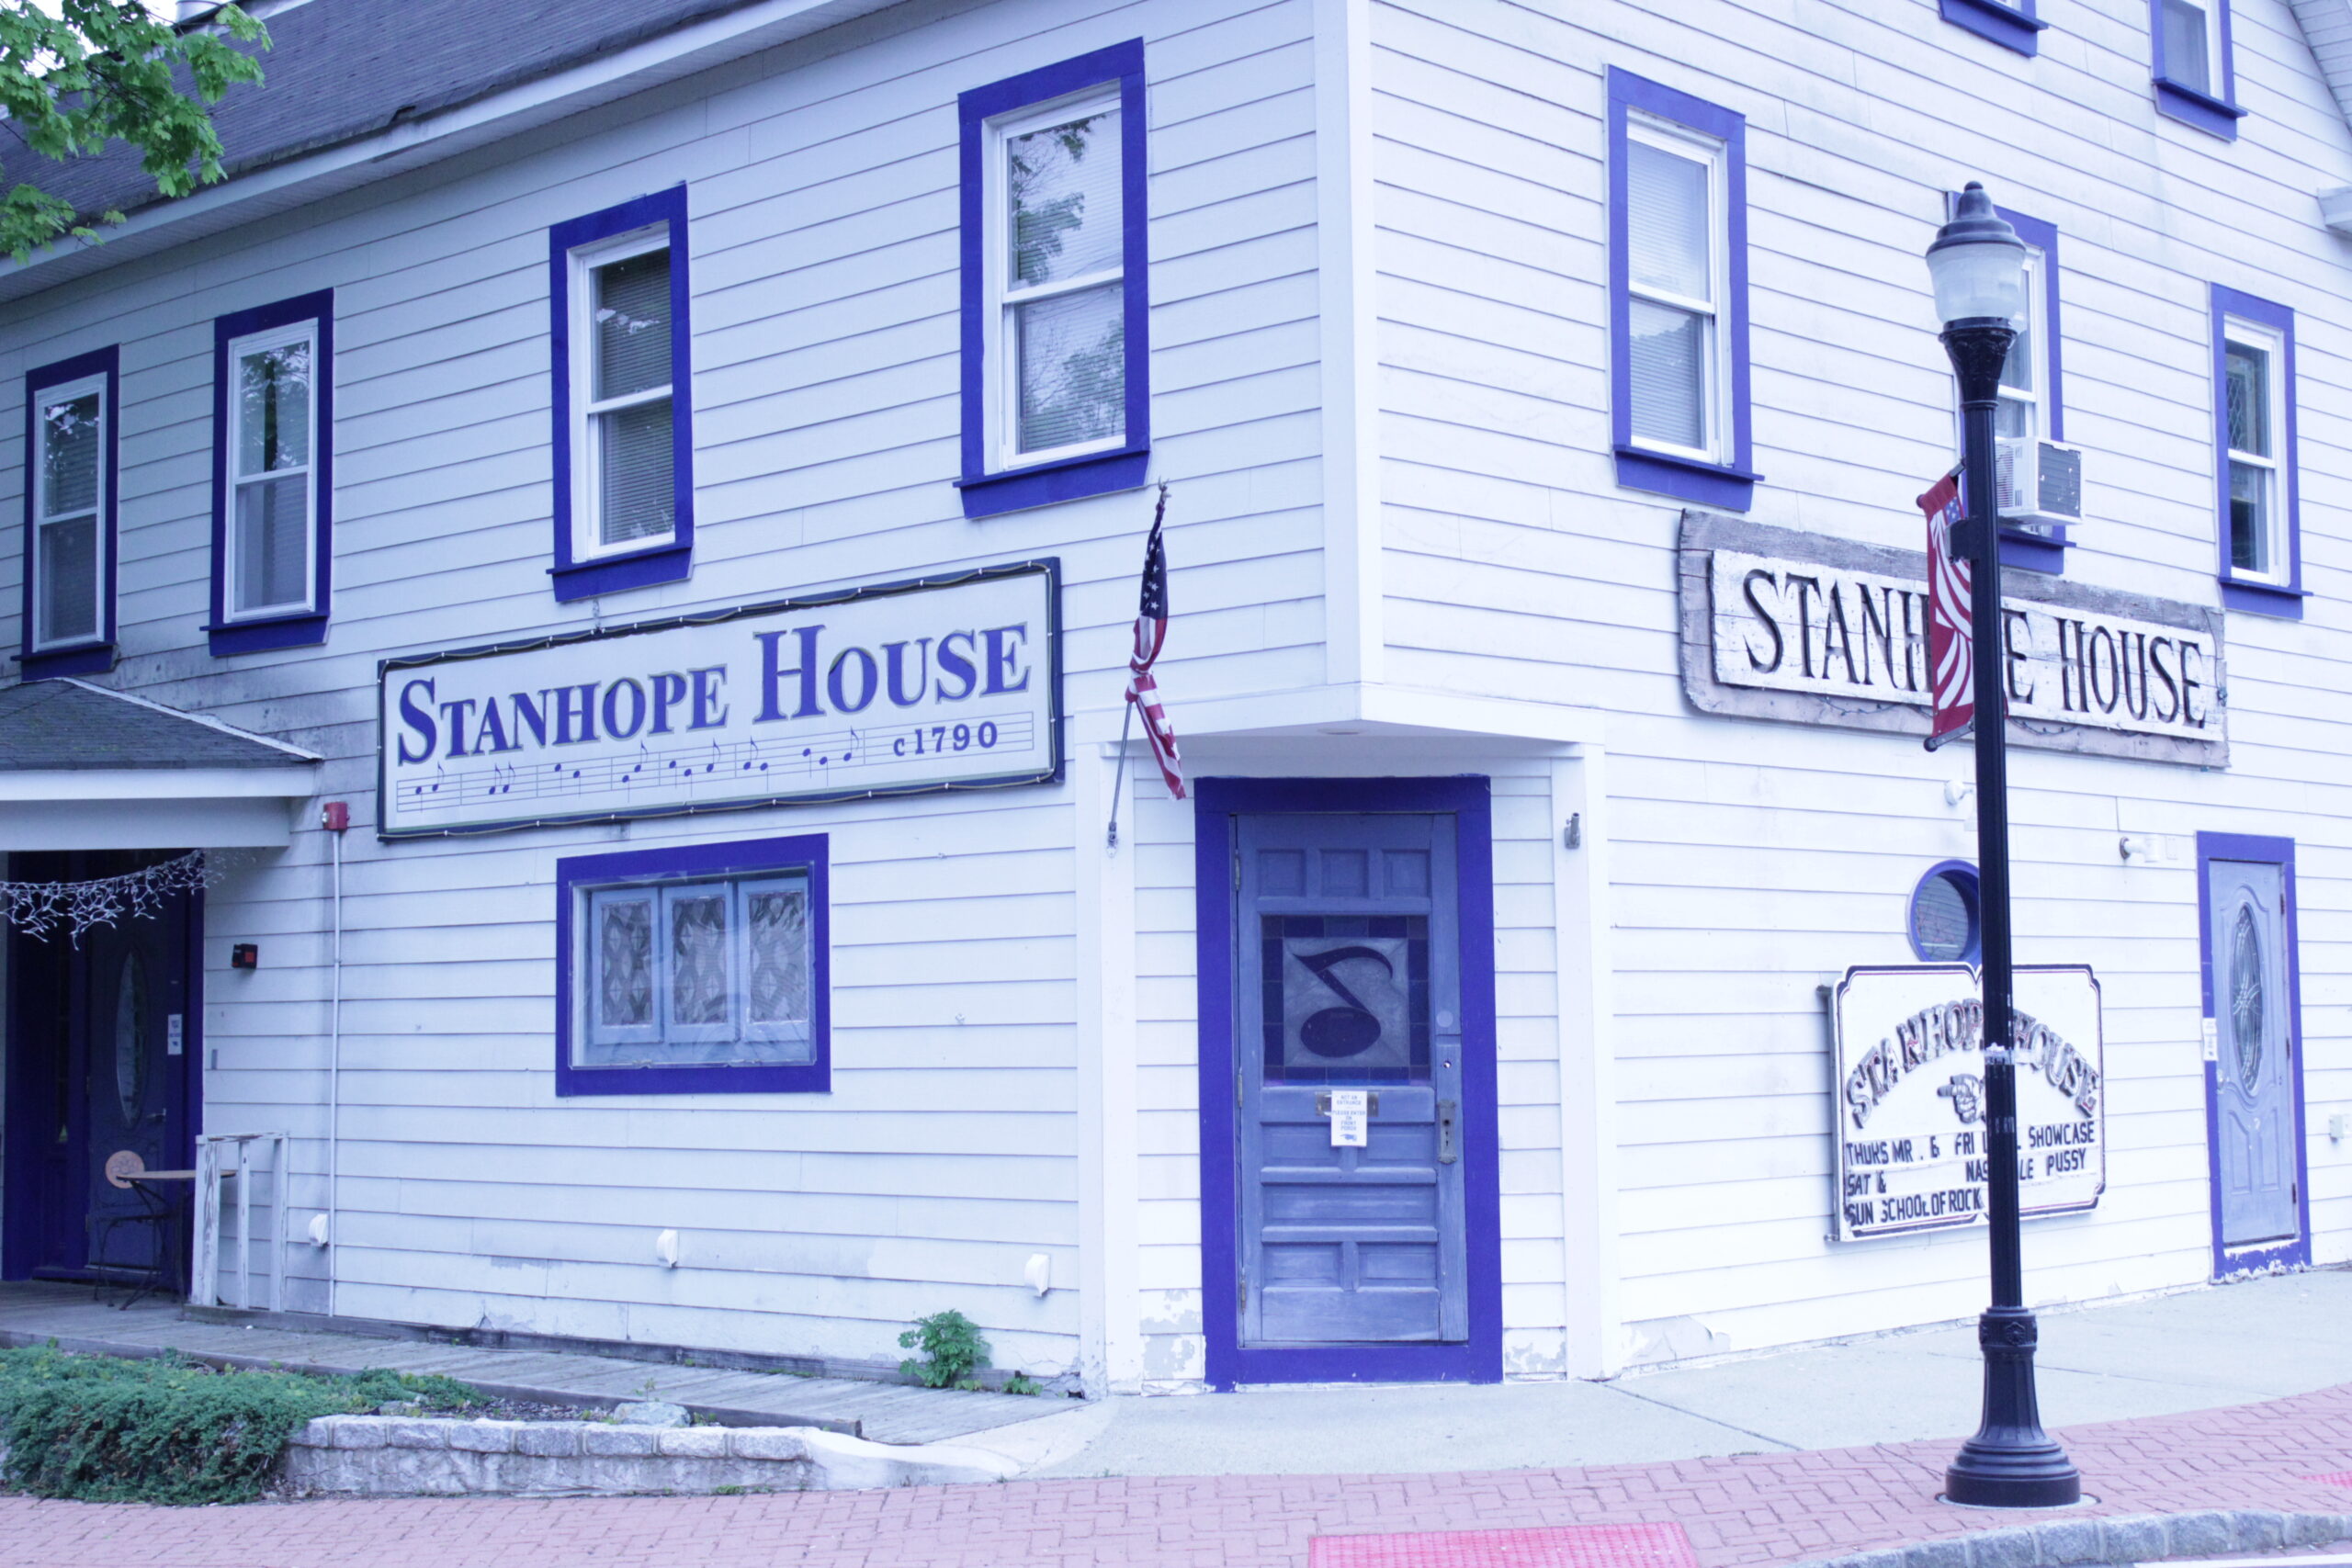 The Stanhope House